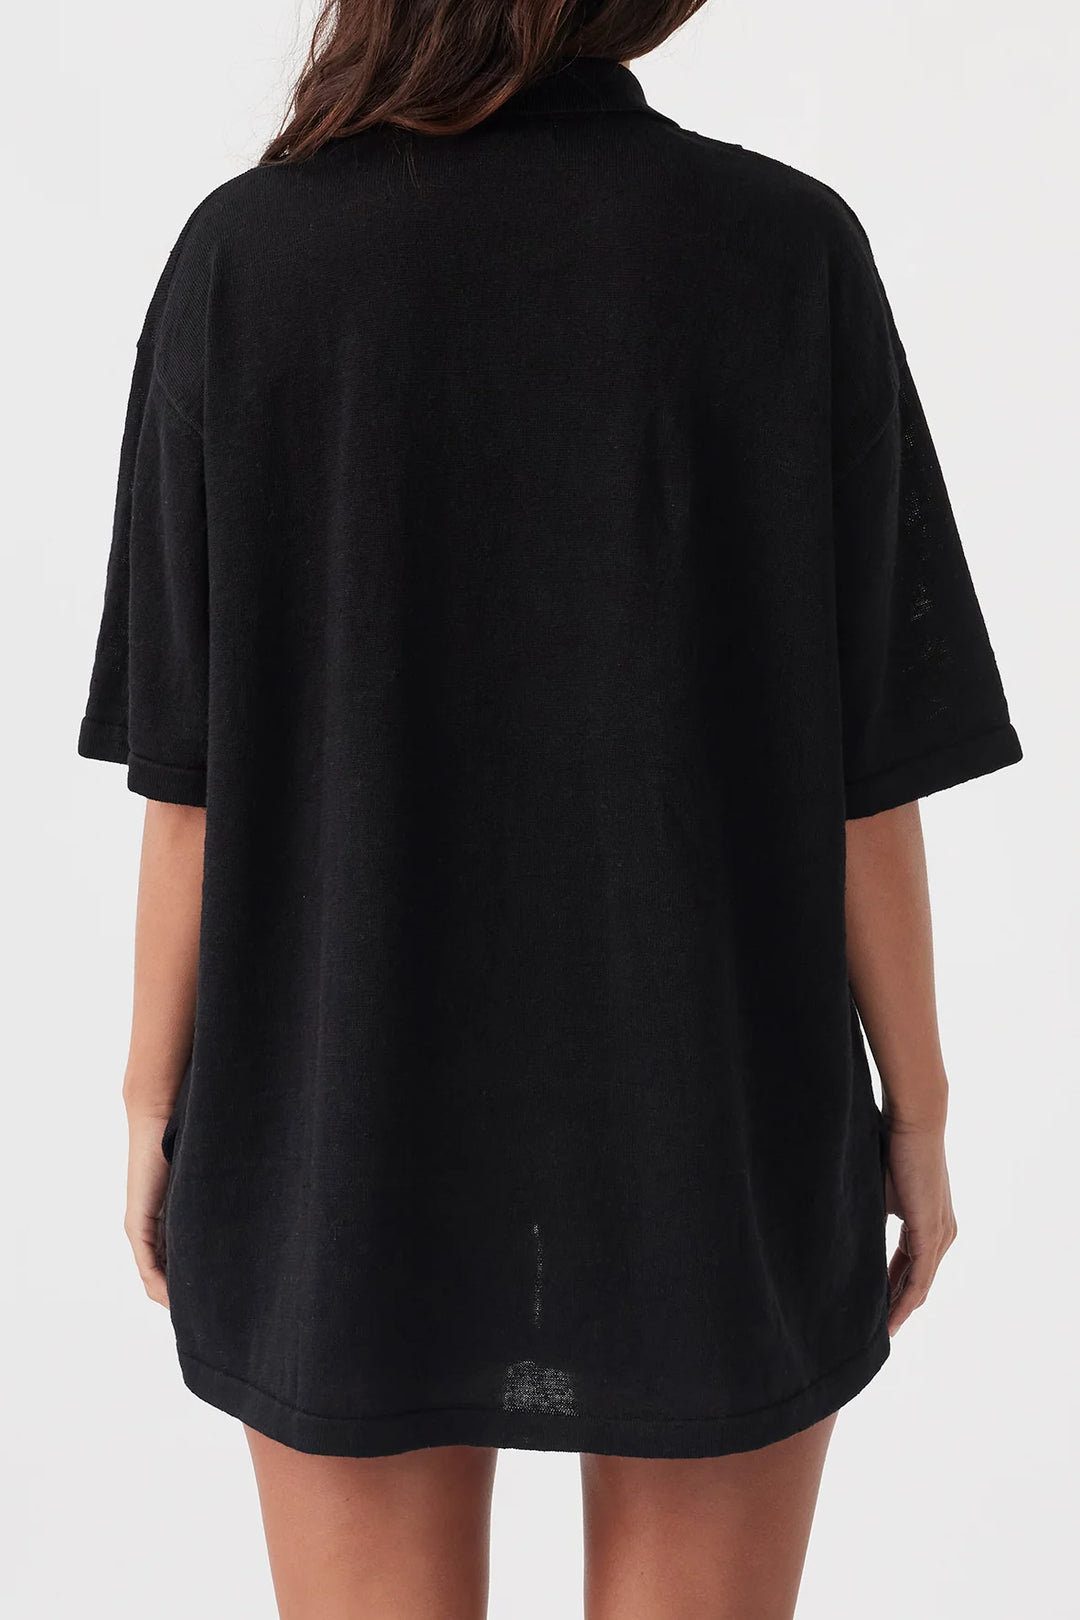 darcy shirt black, Oversized shirt style, Open collar, Front pleat detail, Linen knit, Button down, Minimal waste knit construction, Soft 